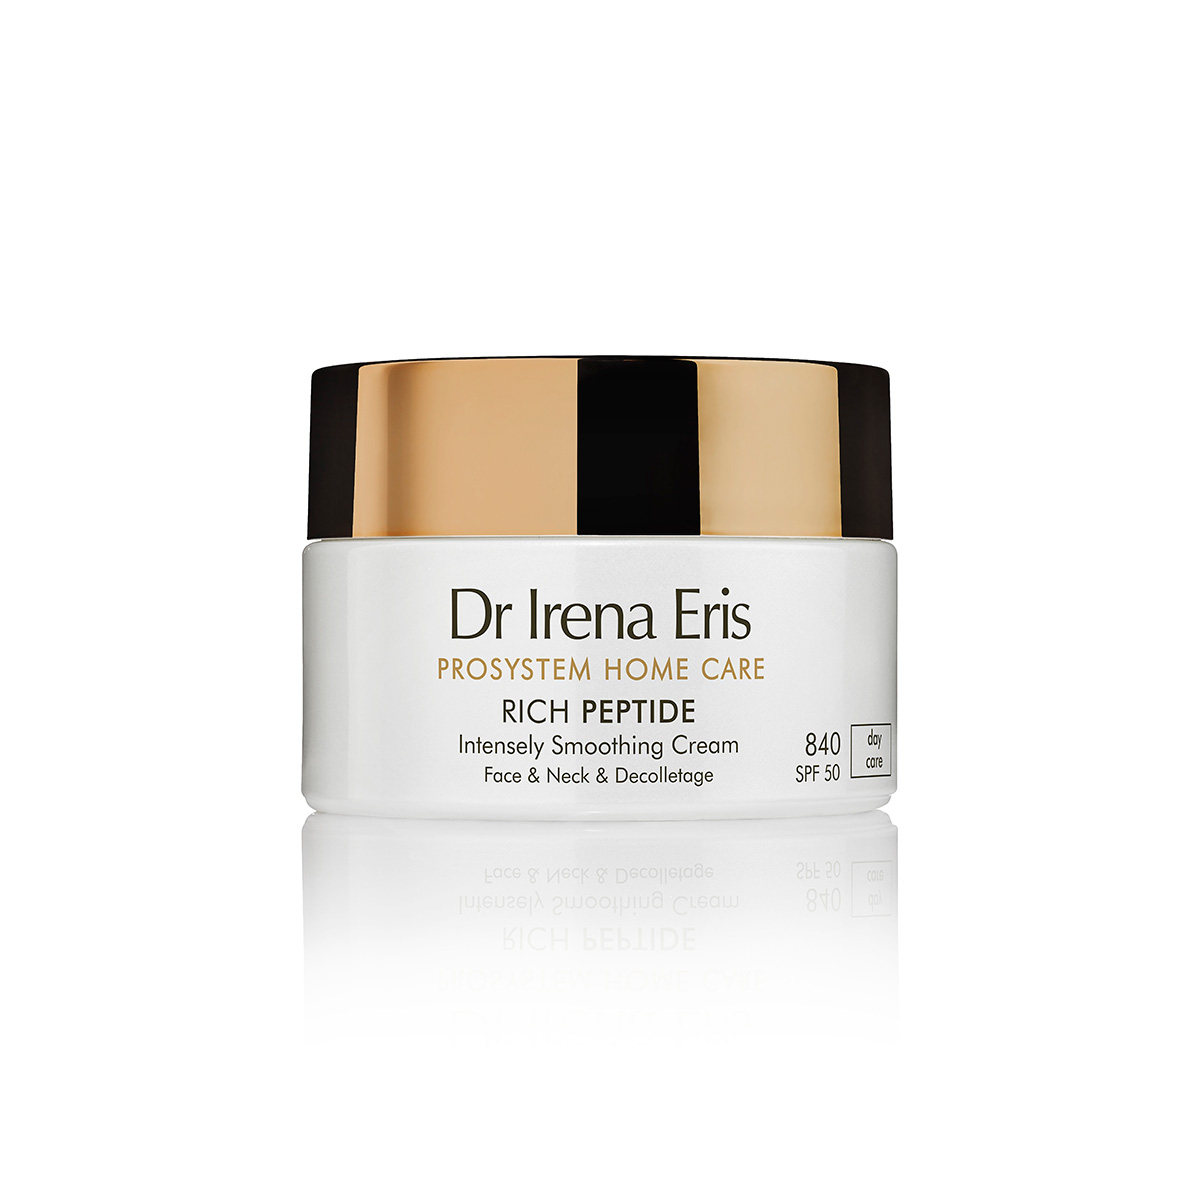  RICH PEPTIDE Intensely Smoothing Day Face Cream SPF 50 840